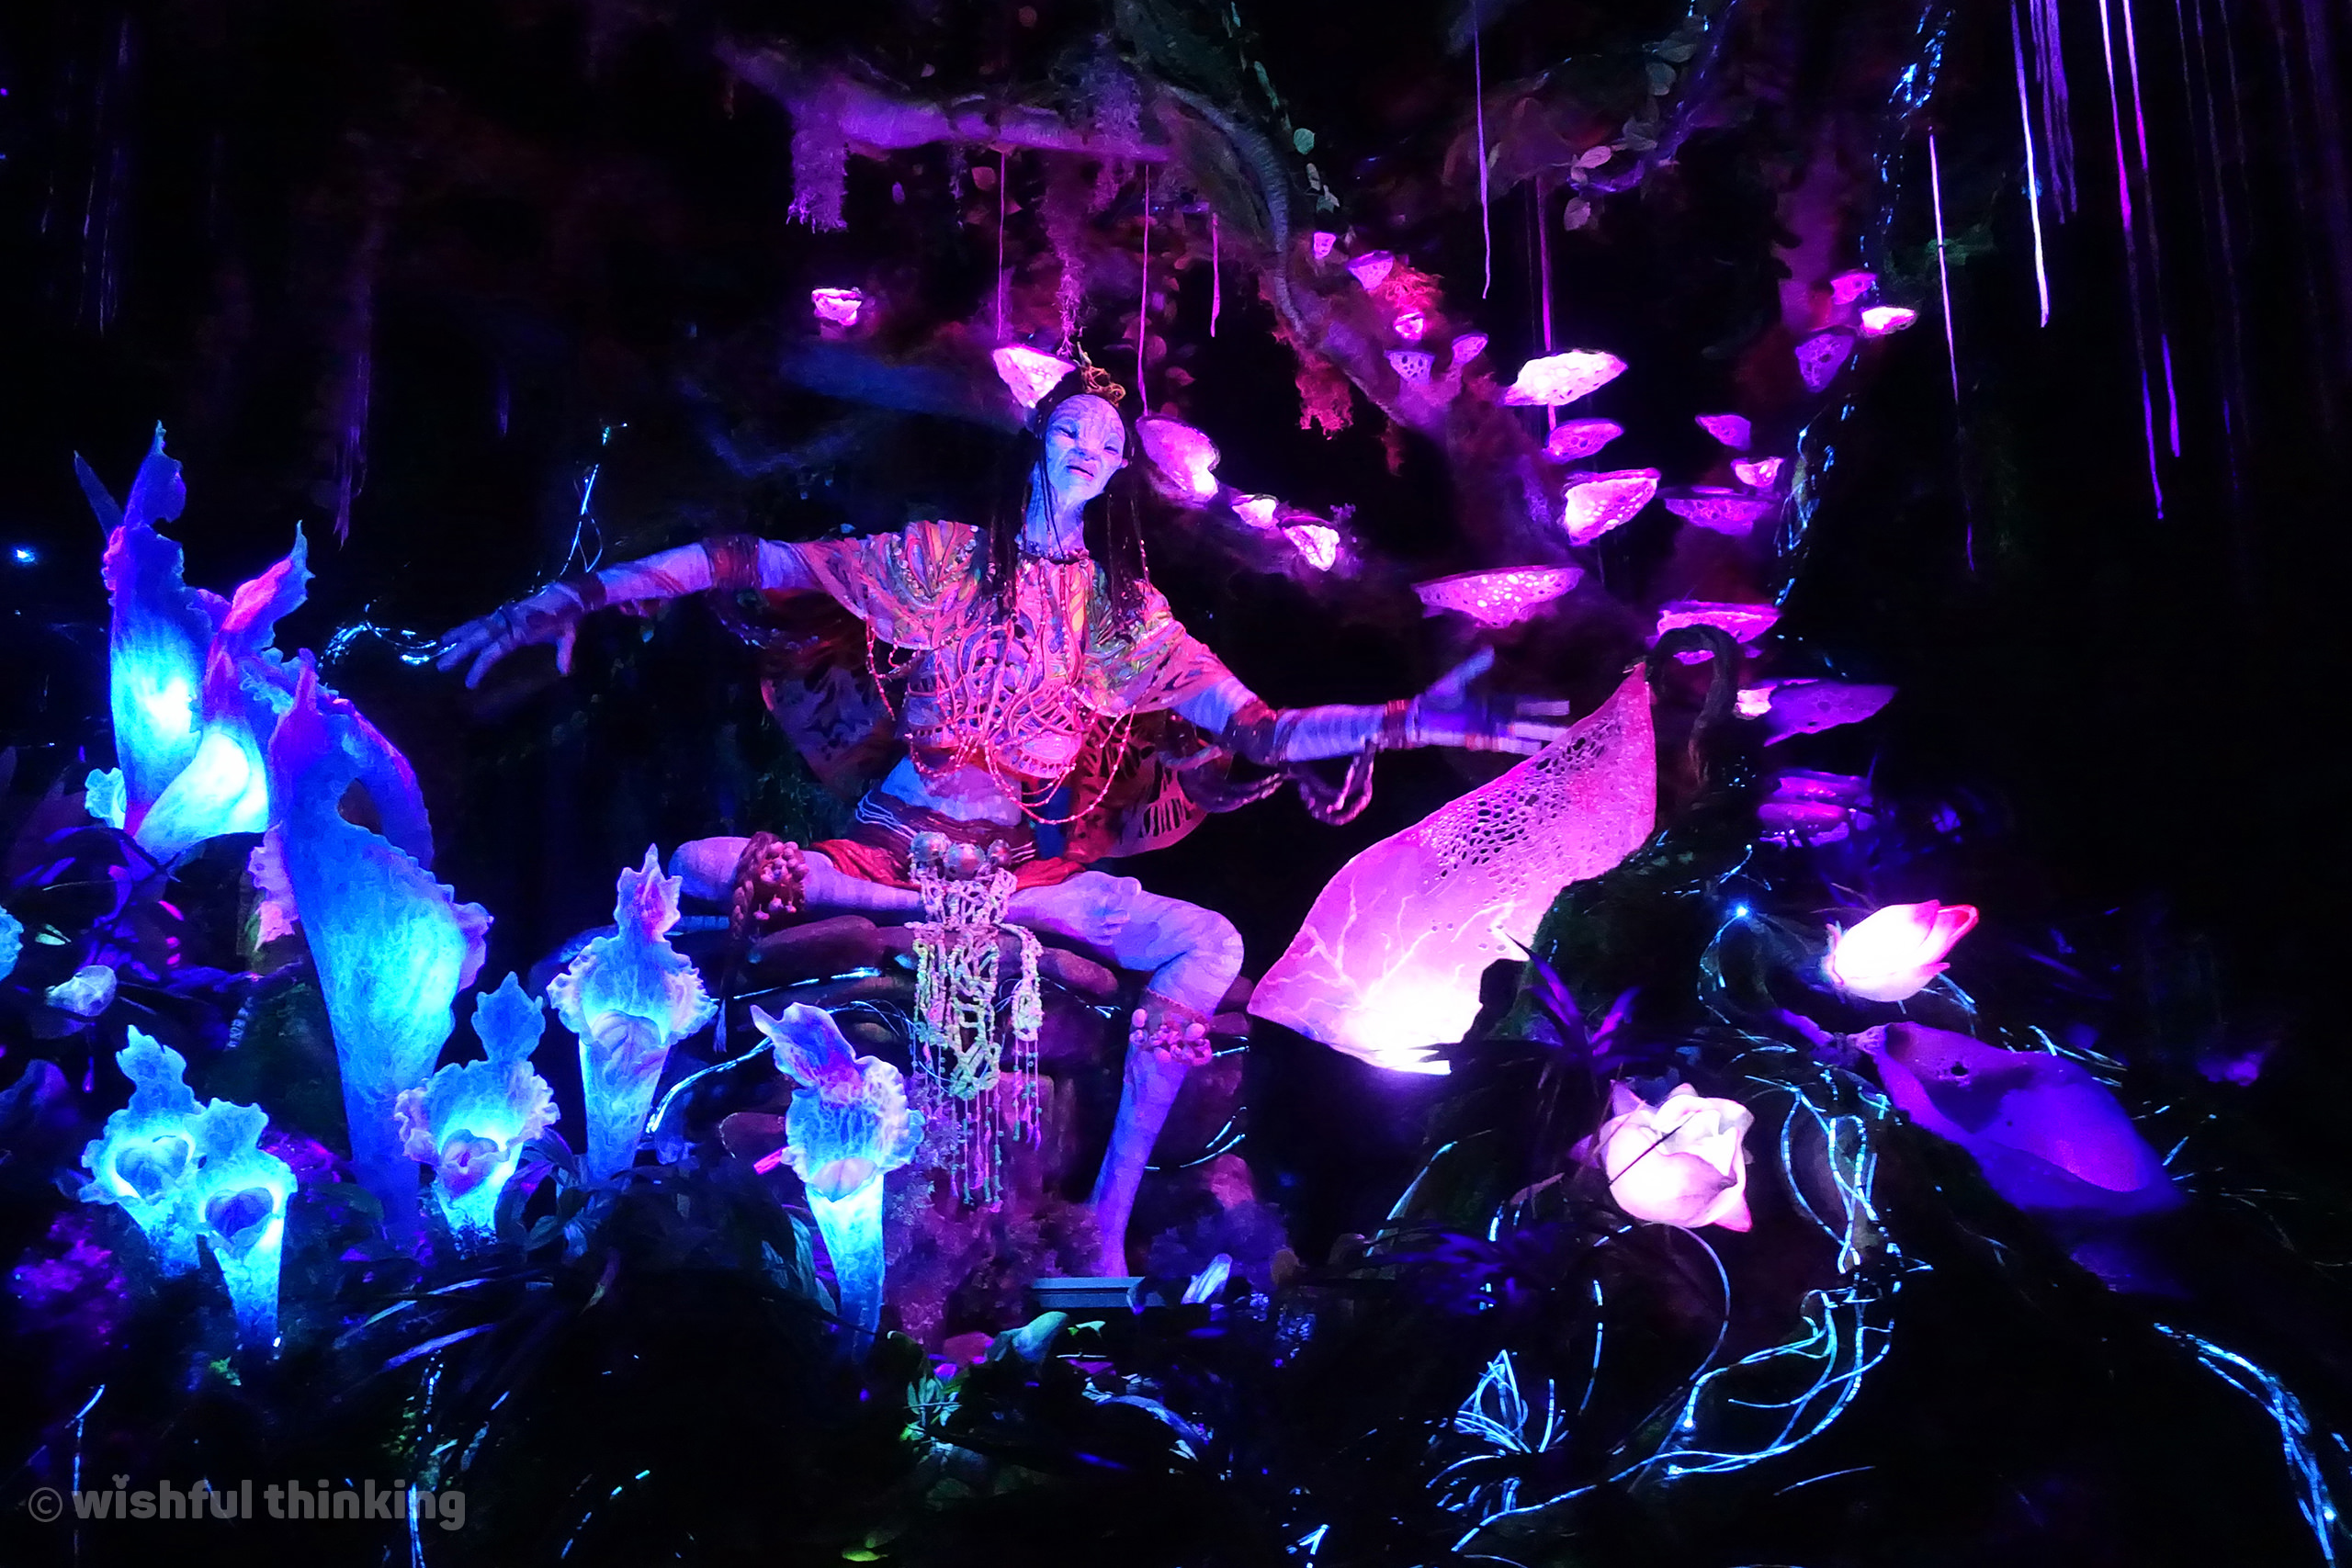 A shaman audio-animatronic delights guests within the Na'vi River Journey in Pandora, the World of Avatar at Disney's Animal Kingdom at Walt Disney World in Orlando, Florida